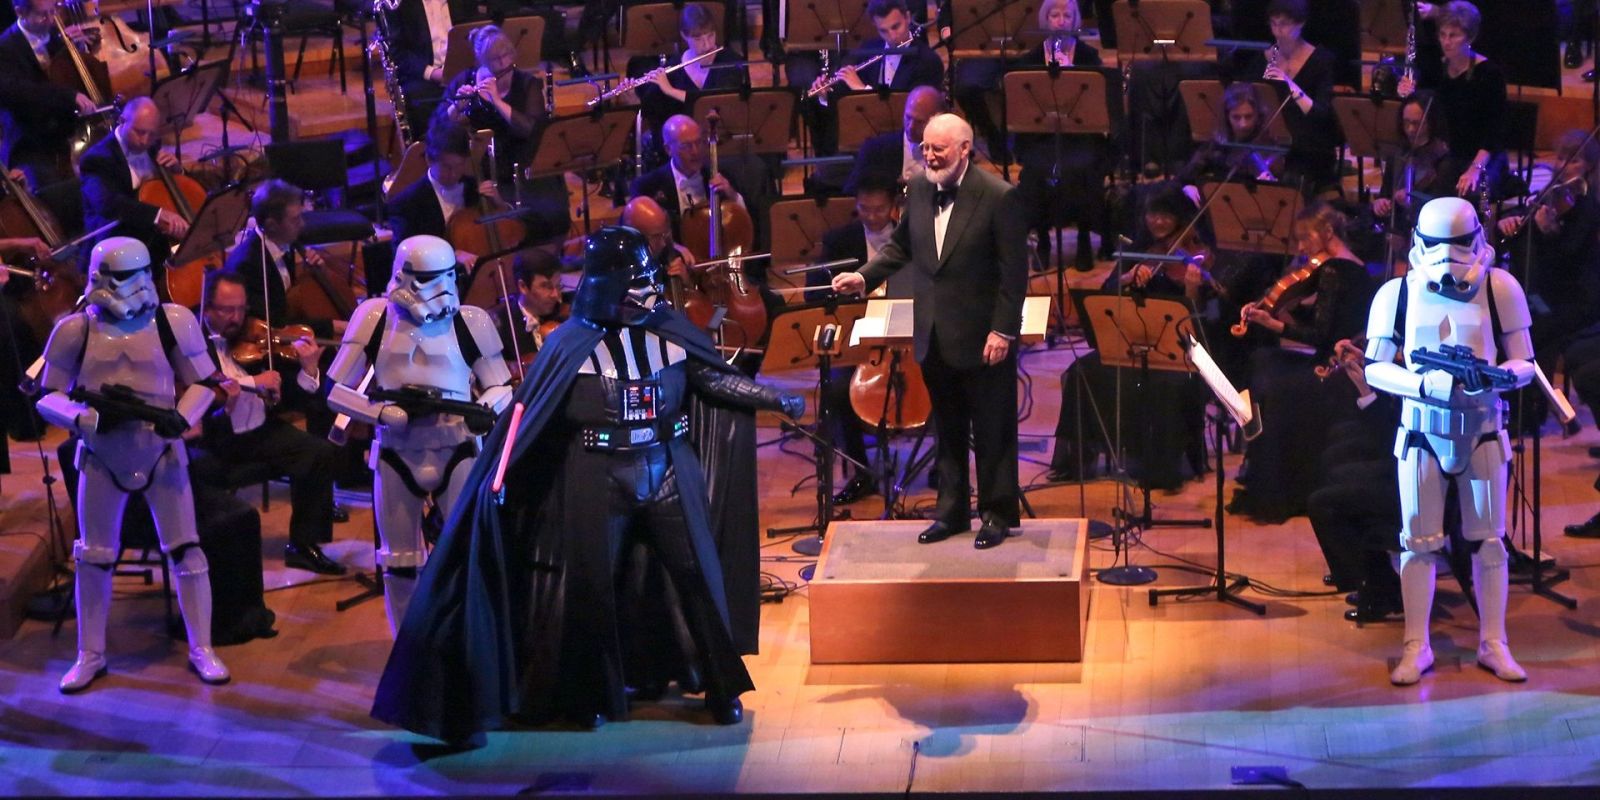 John Williams on stage with Darth Vader and Stormtroopers